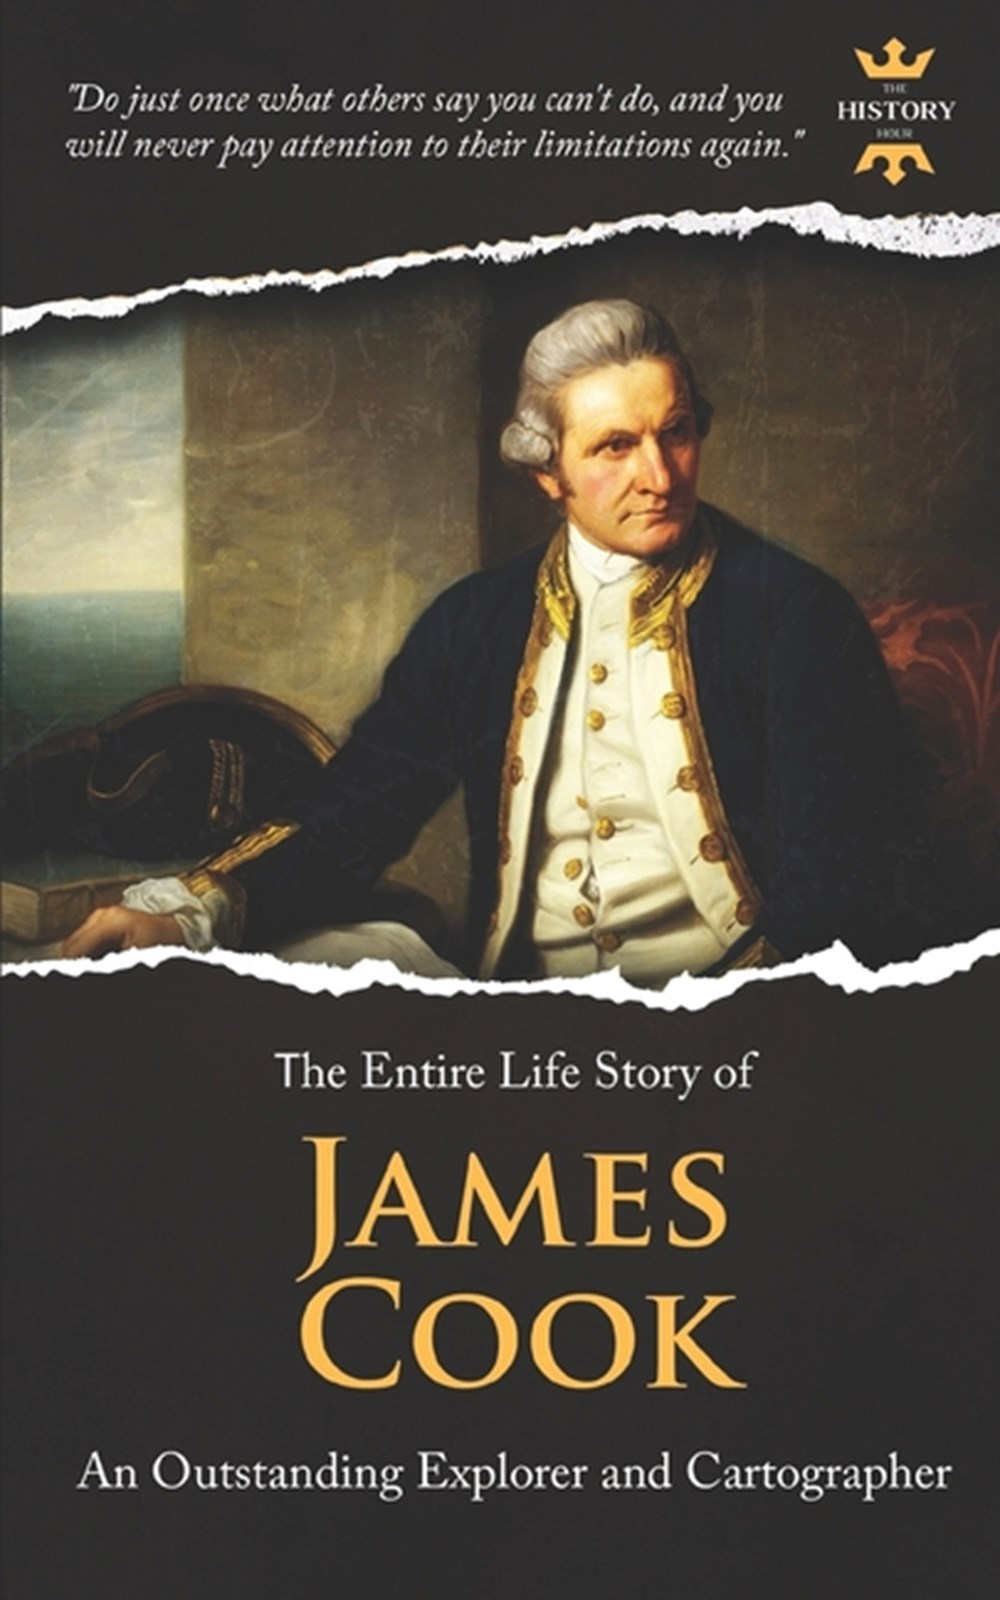 James Cook An Outstanding Explorer and Cartographer. The Entire Life Story